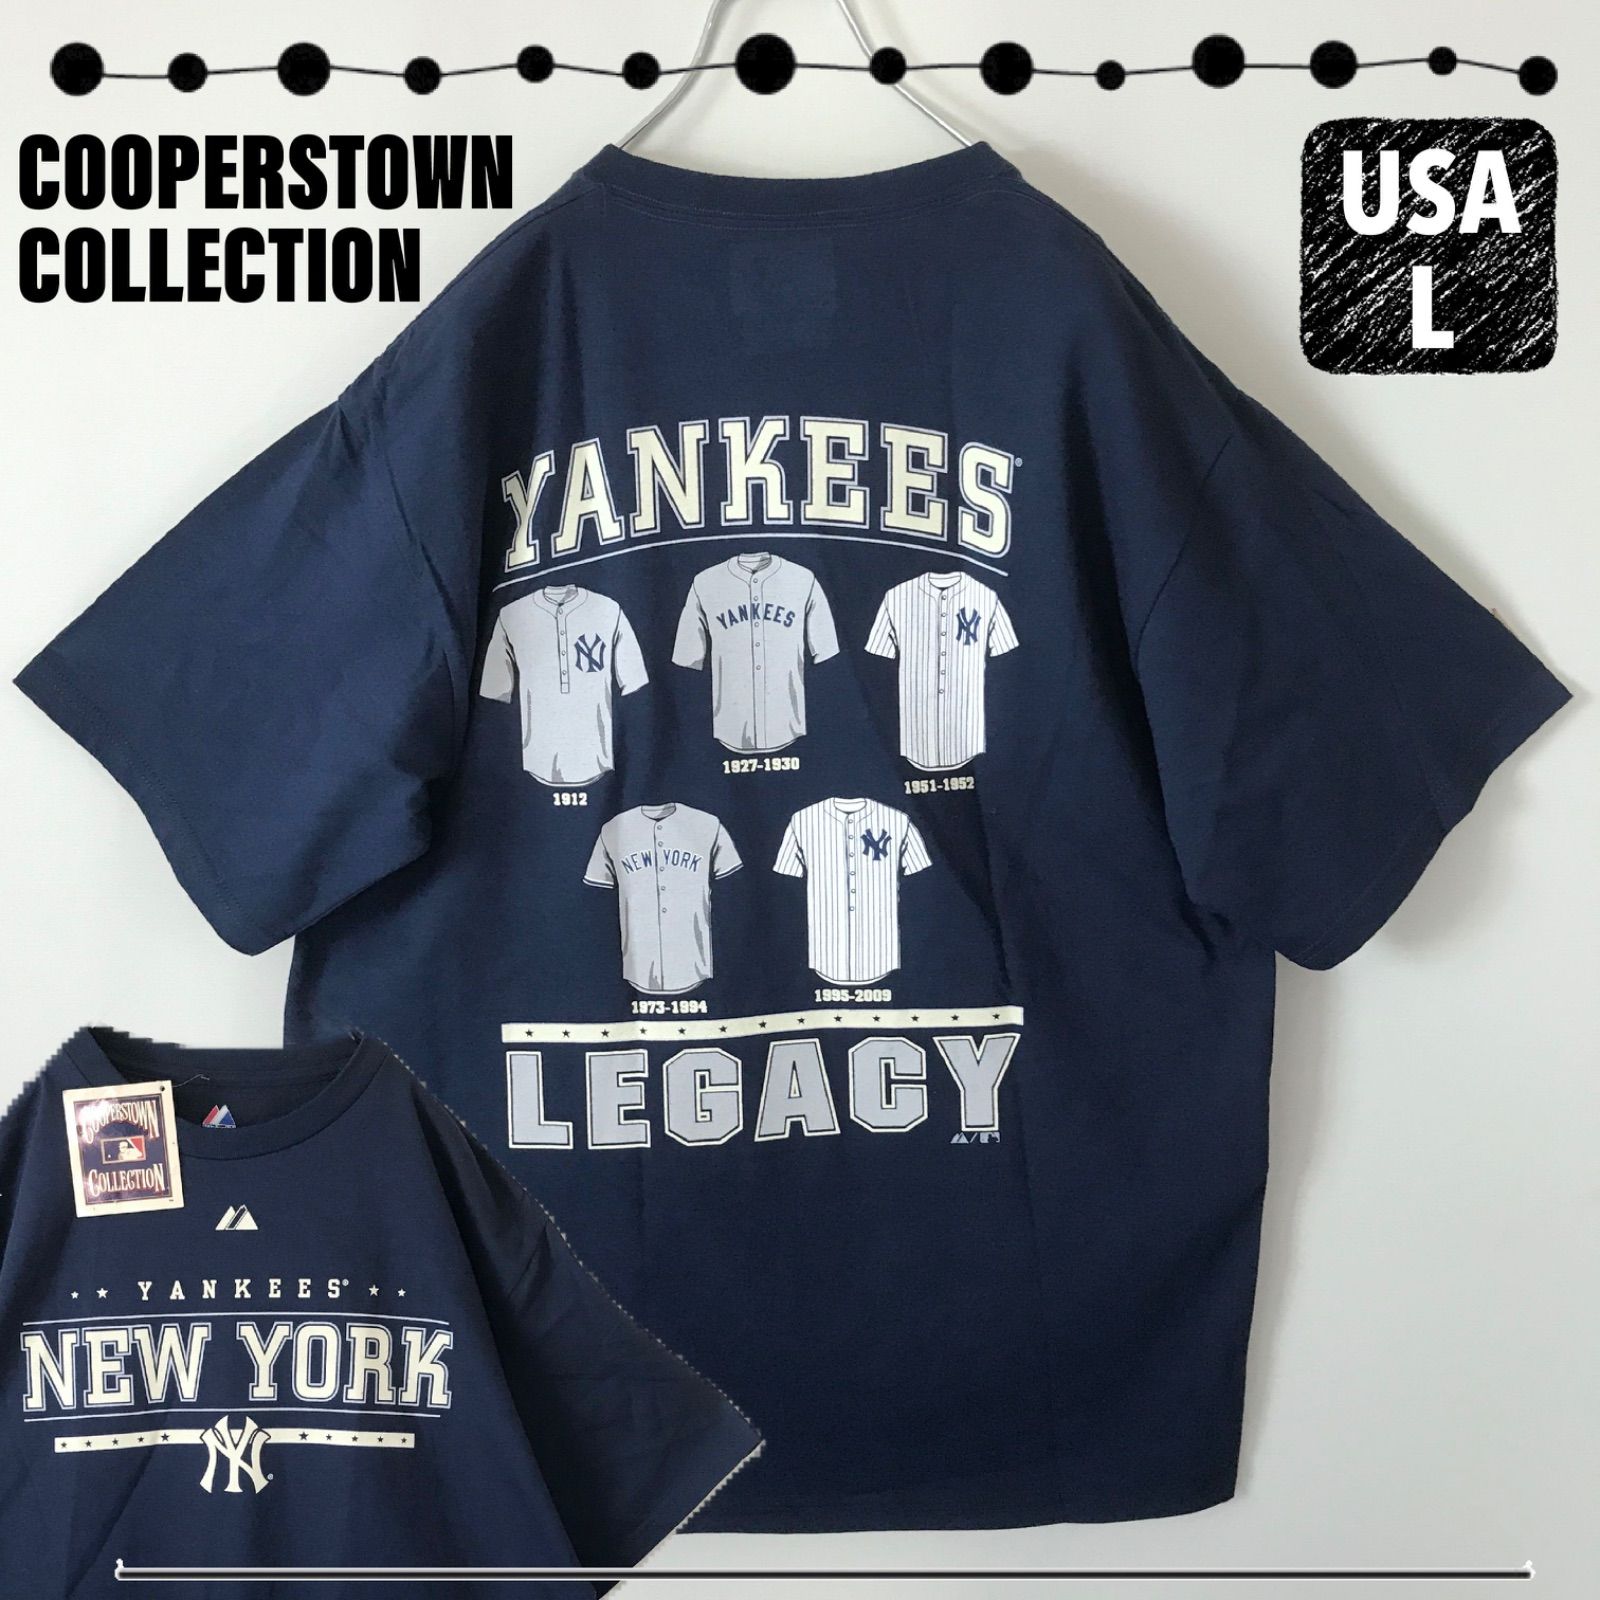 COOPERSTOWN COLLECTION ユニフォーム - 応援グッズ